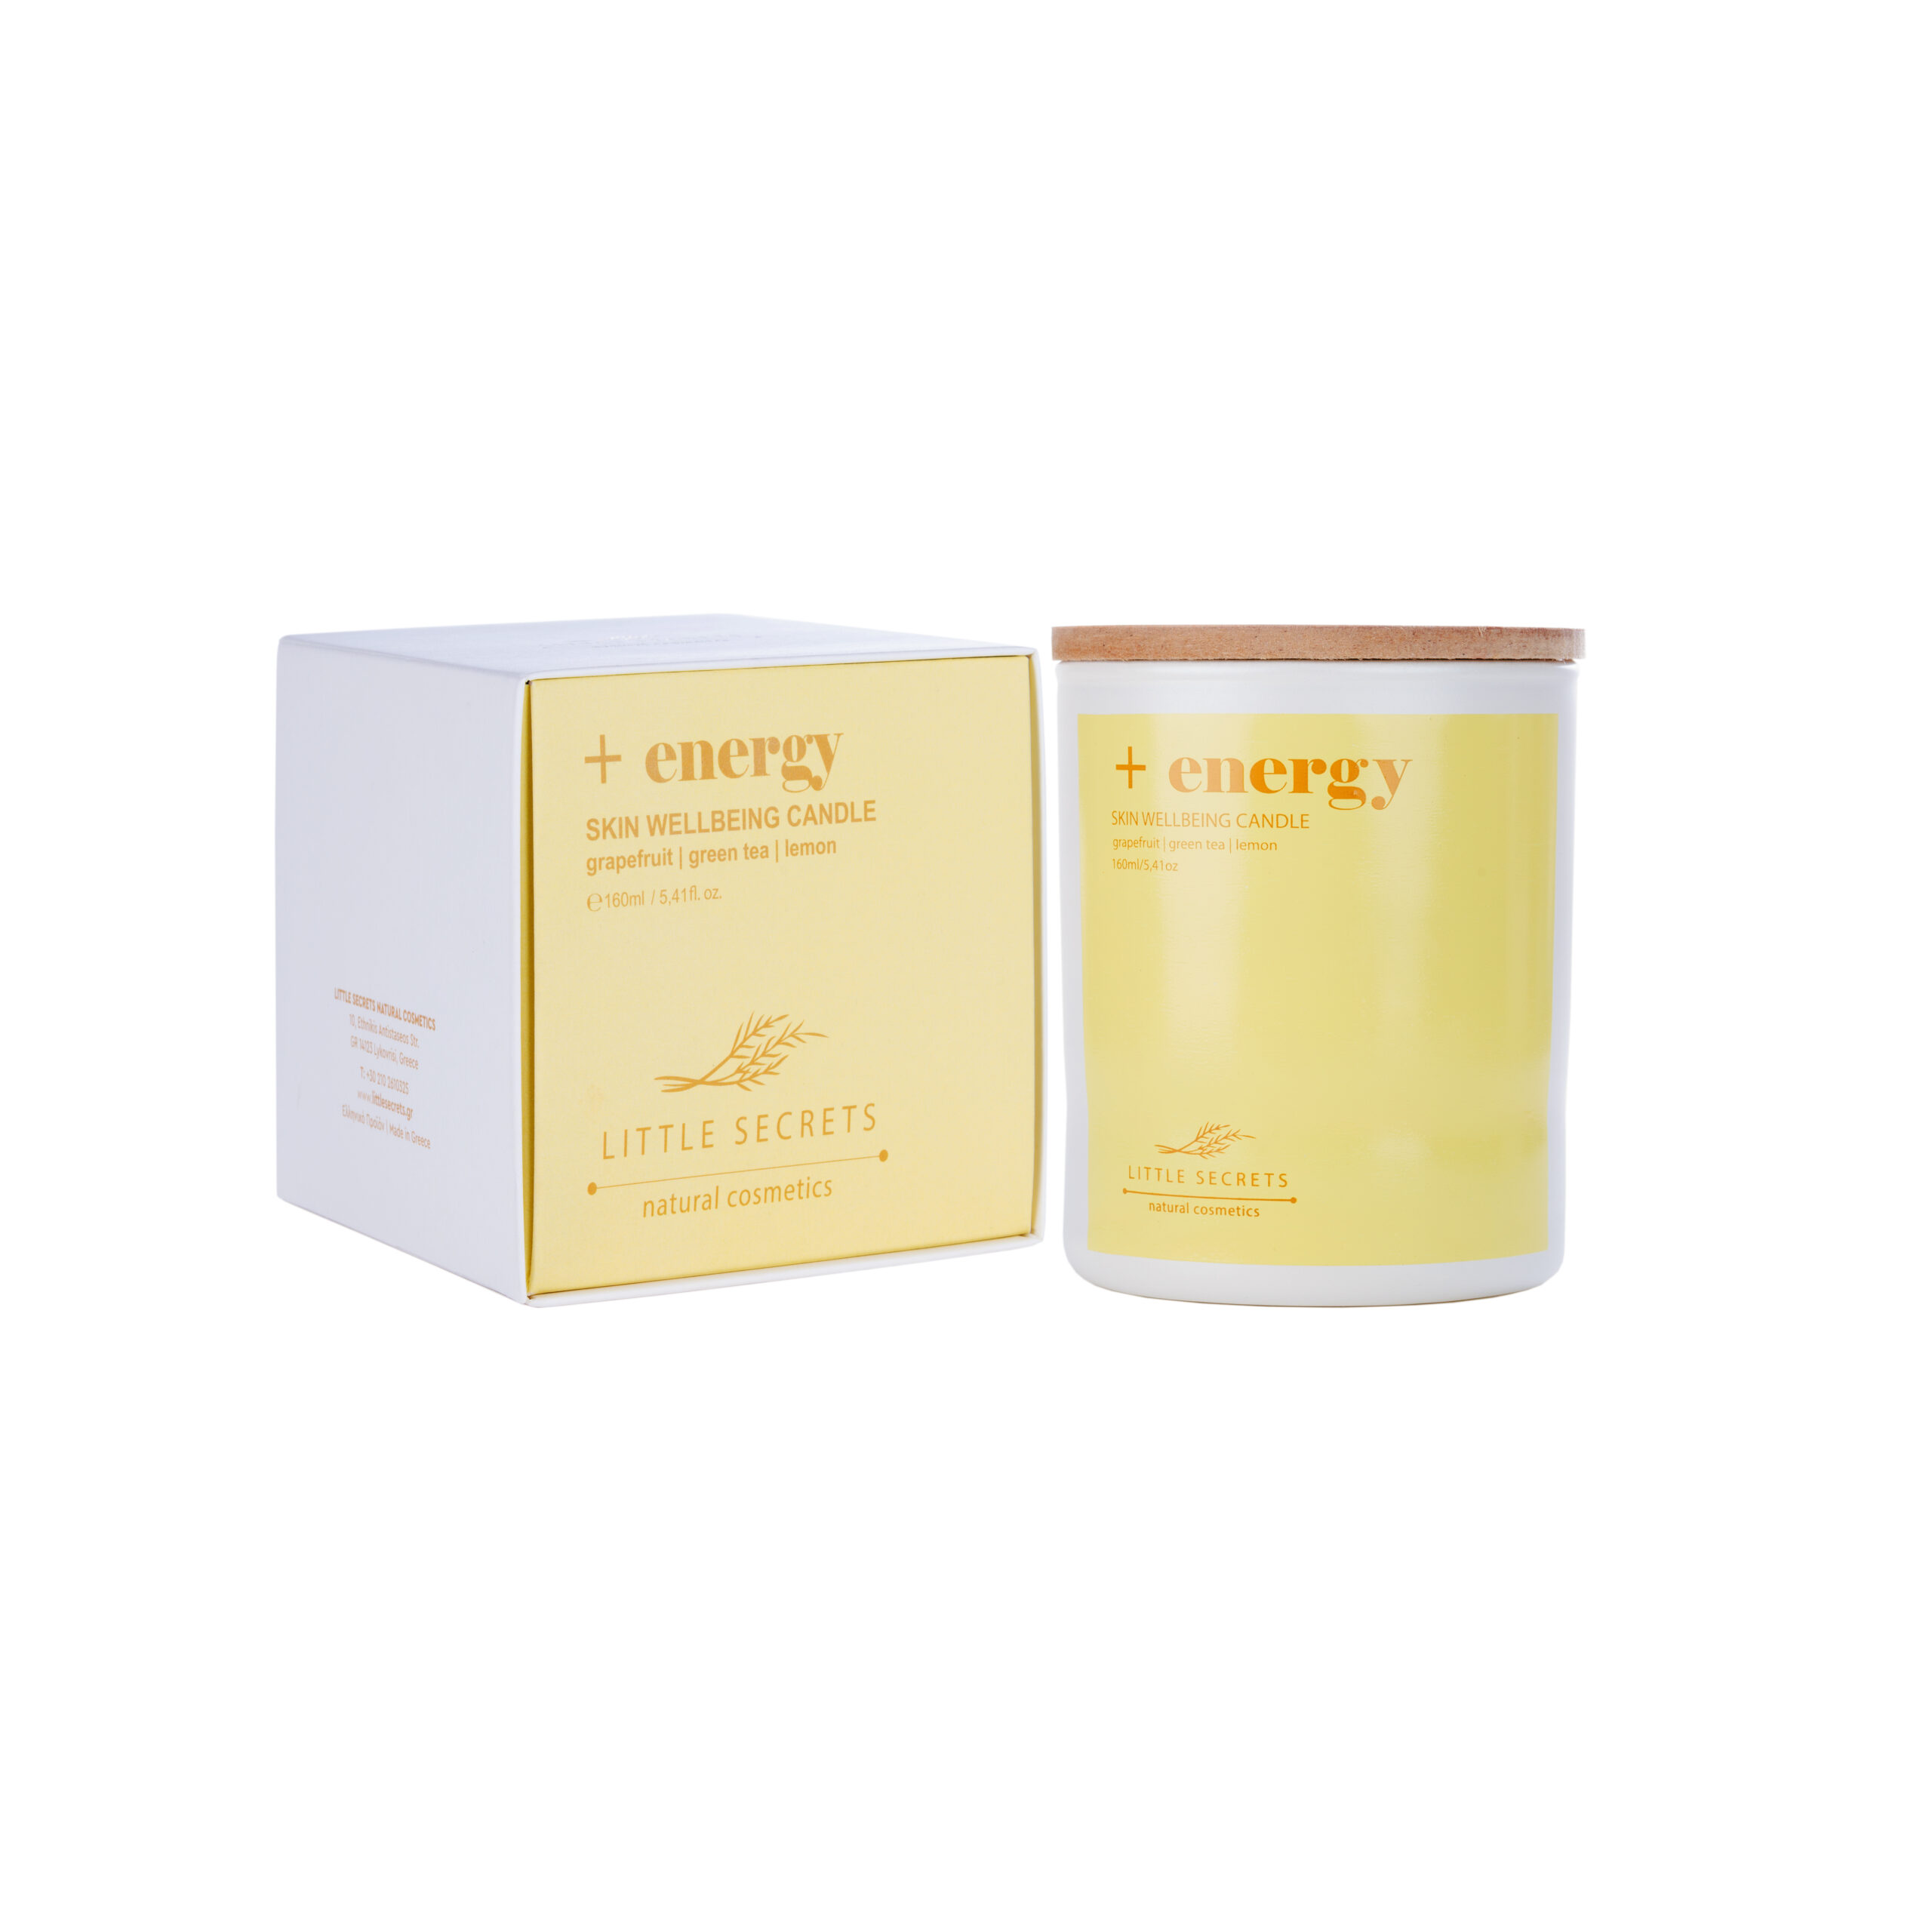 +Energy Skin Wellbeing Candle